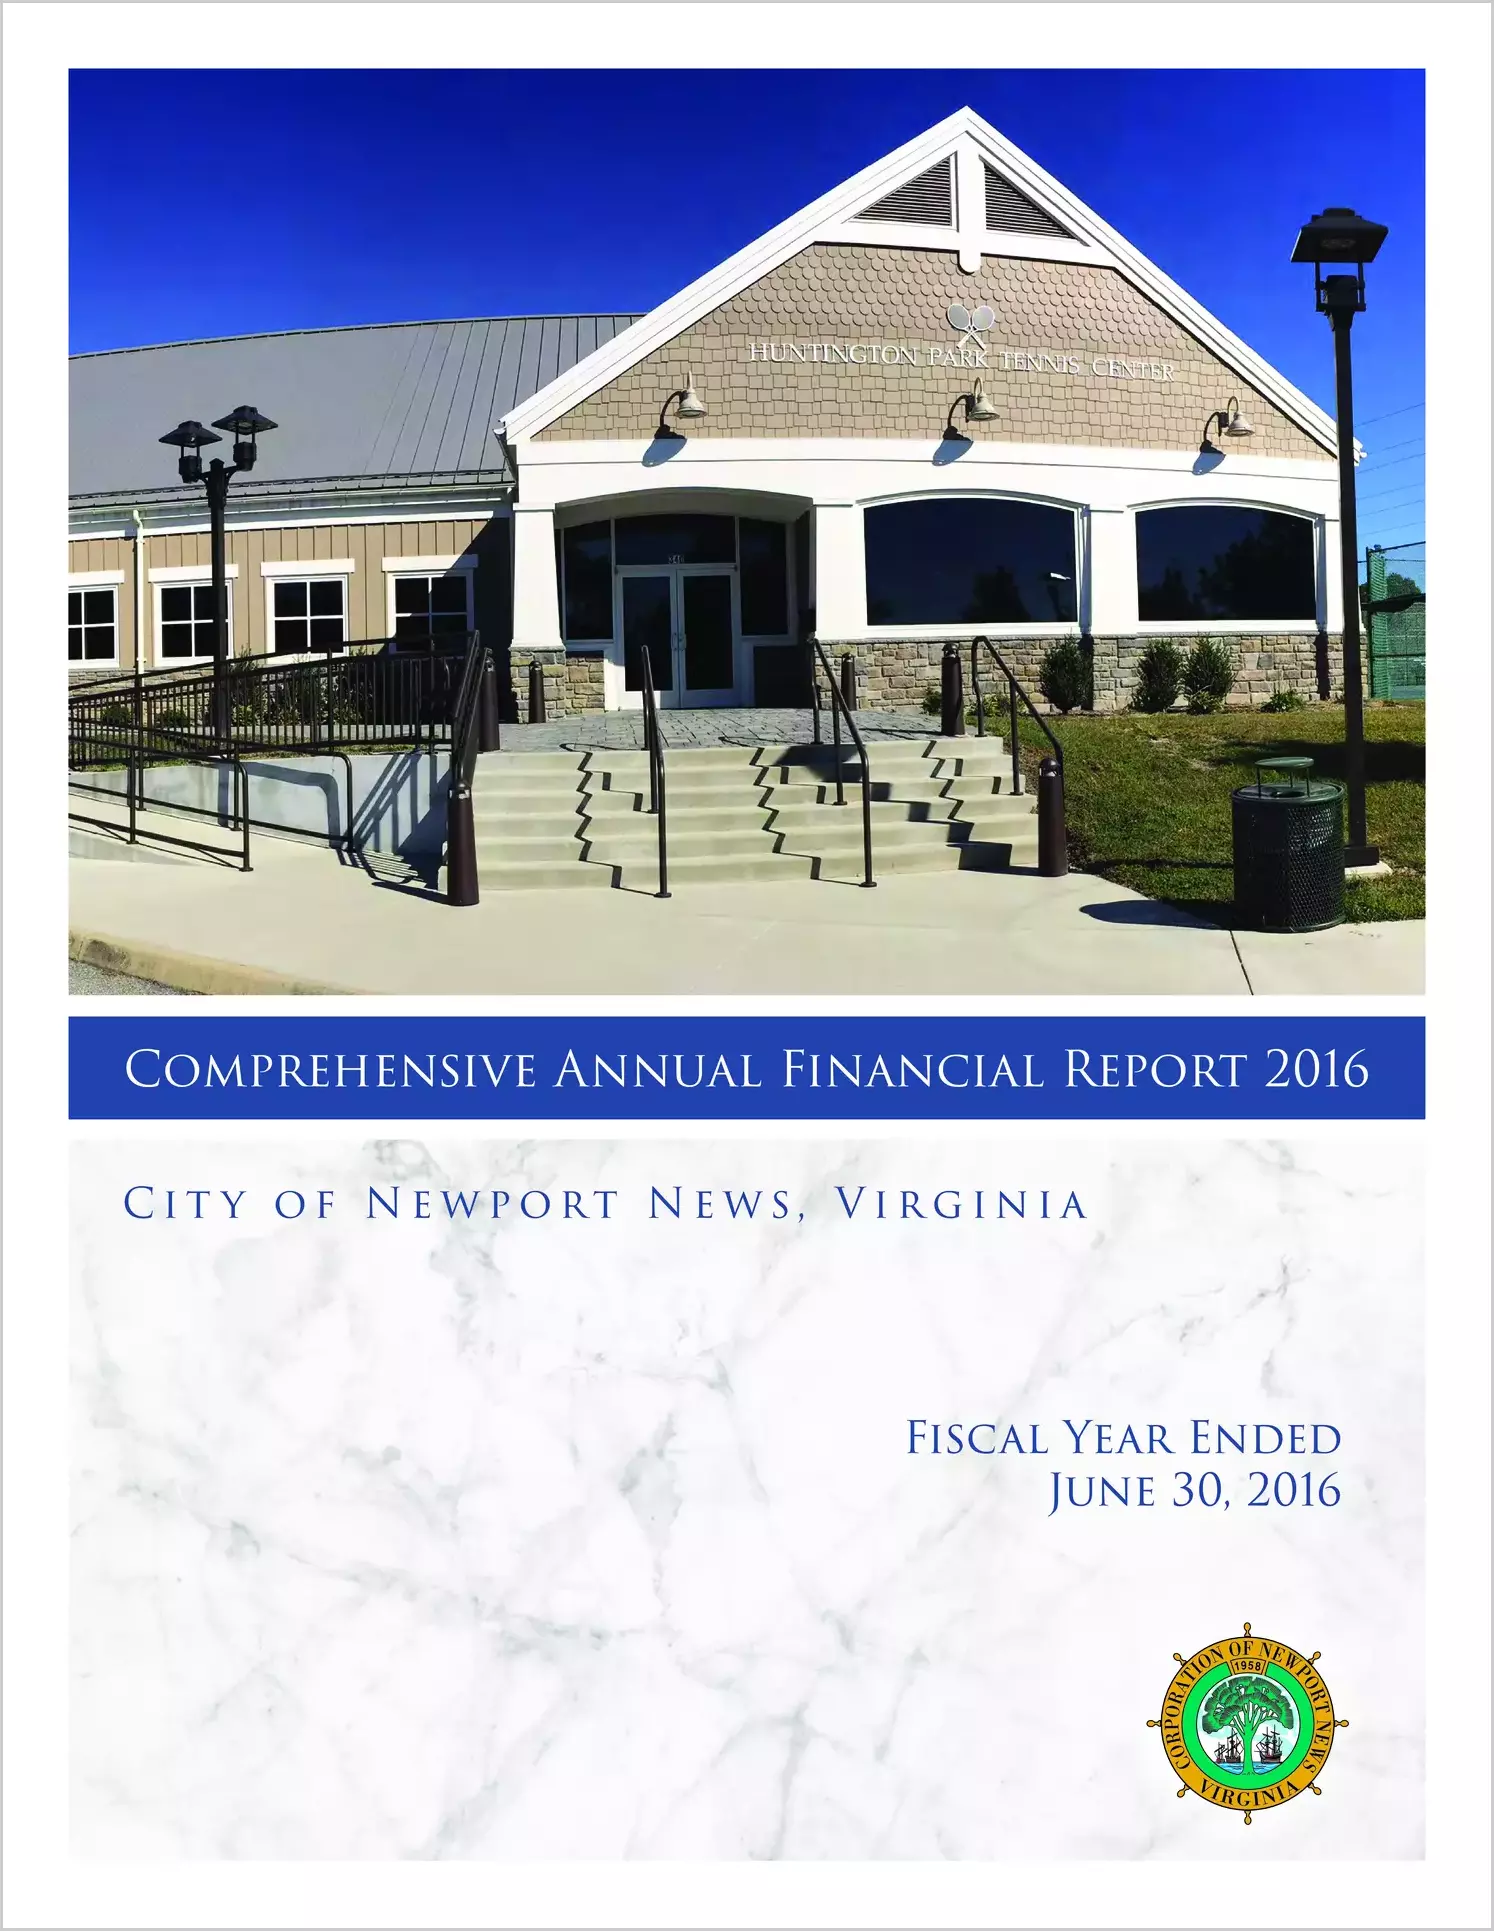 2016 Annual Financial Report for City of Newport News